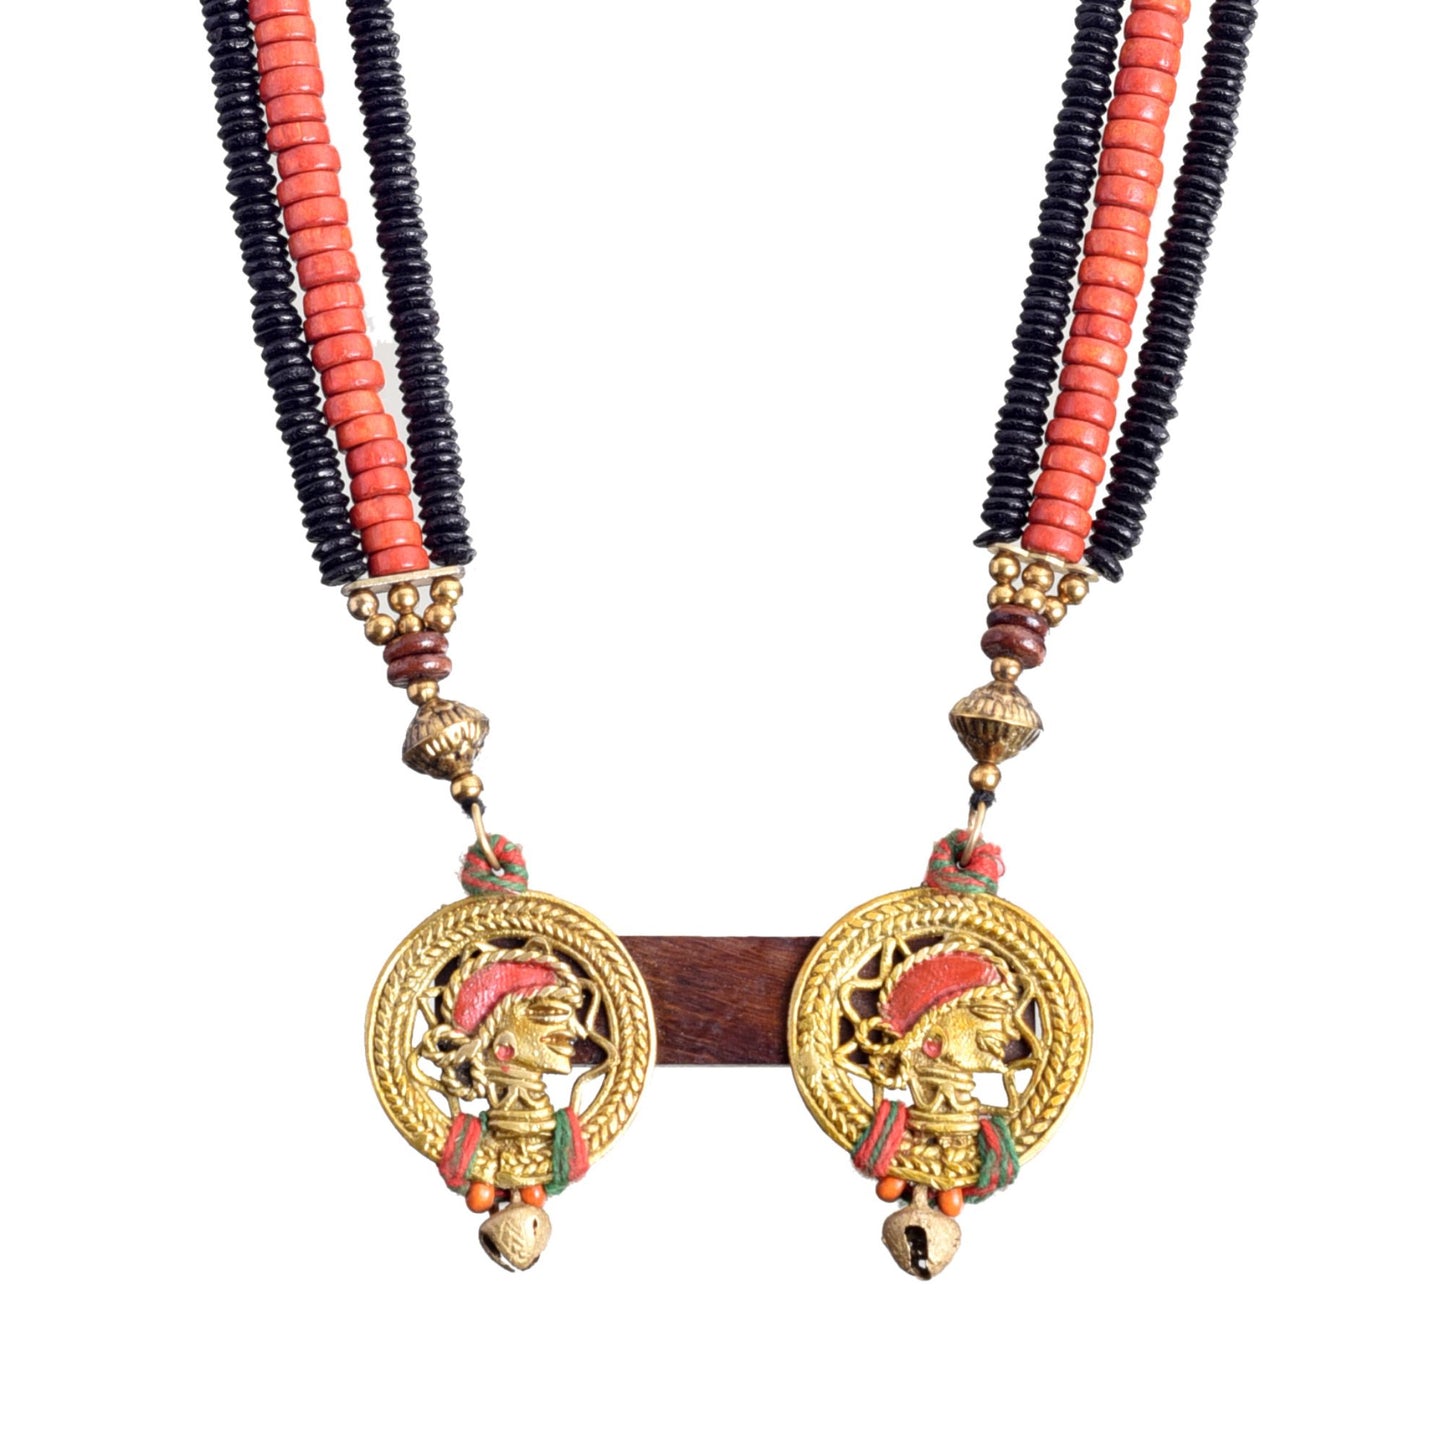 Regal Sisters: Handcrafted Wooden Necklace